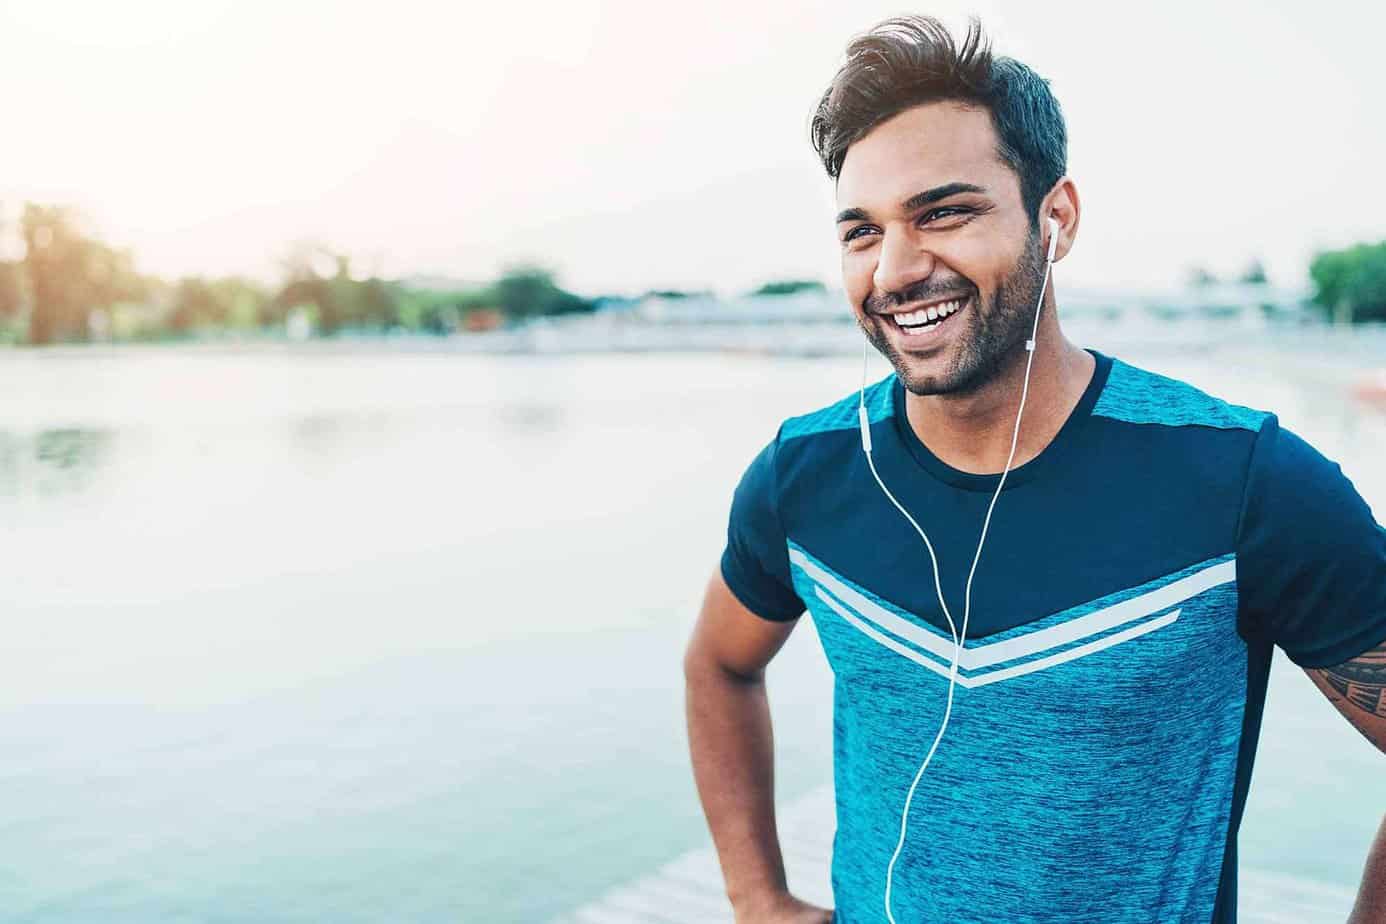 man in blue t-shirt running with headphones smiling by lake